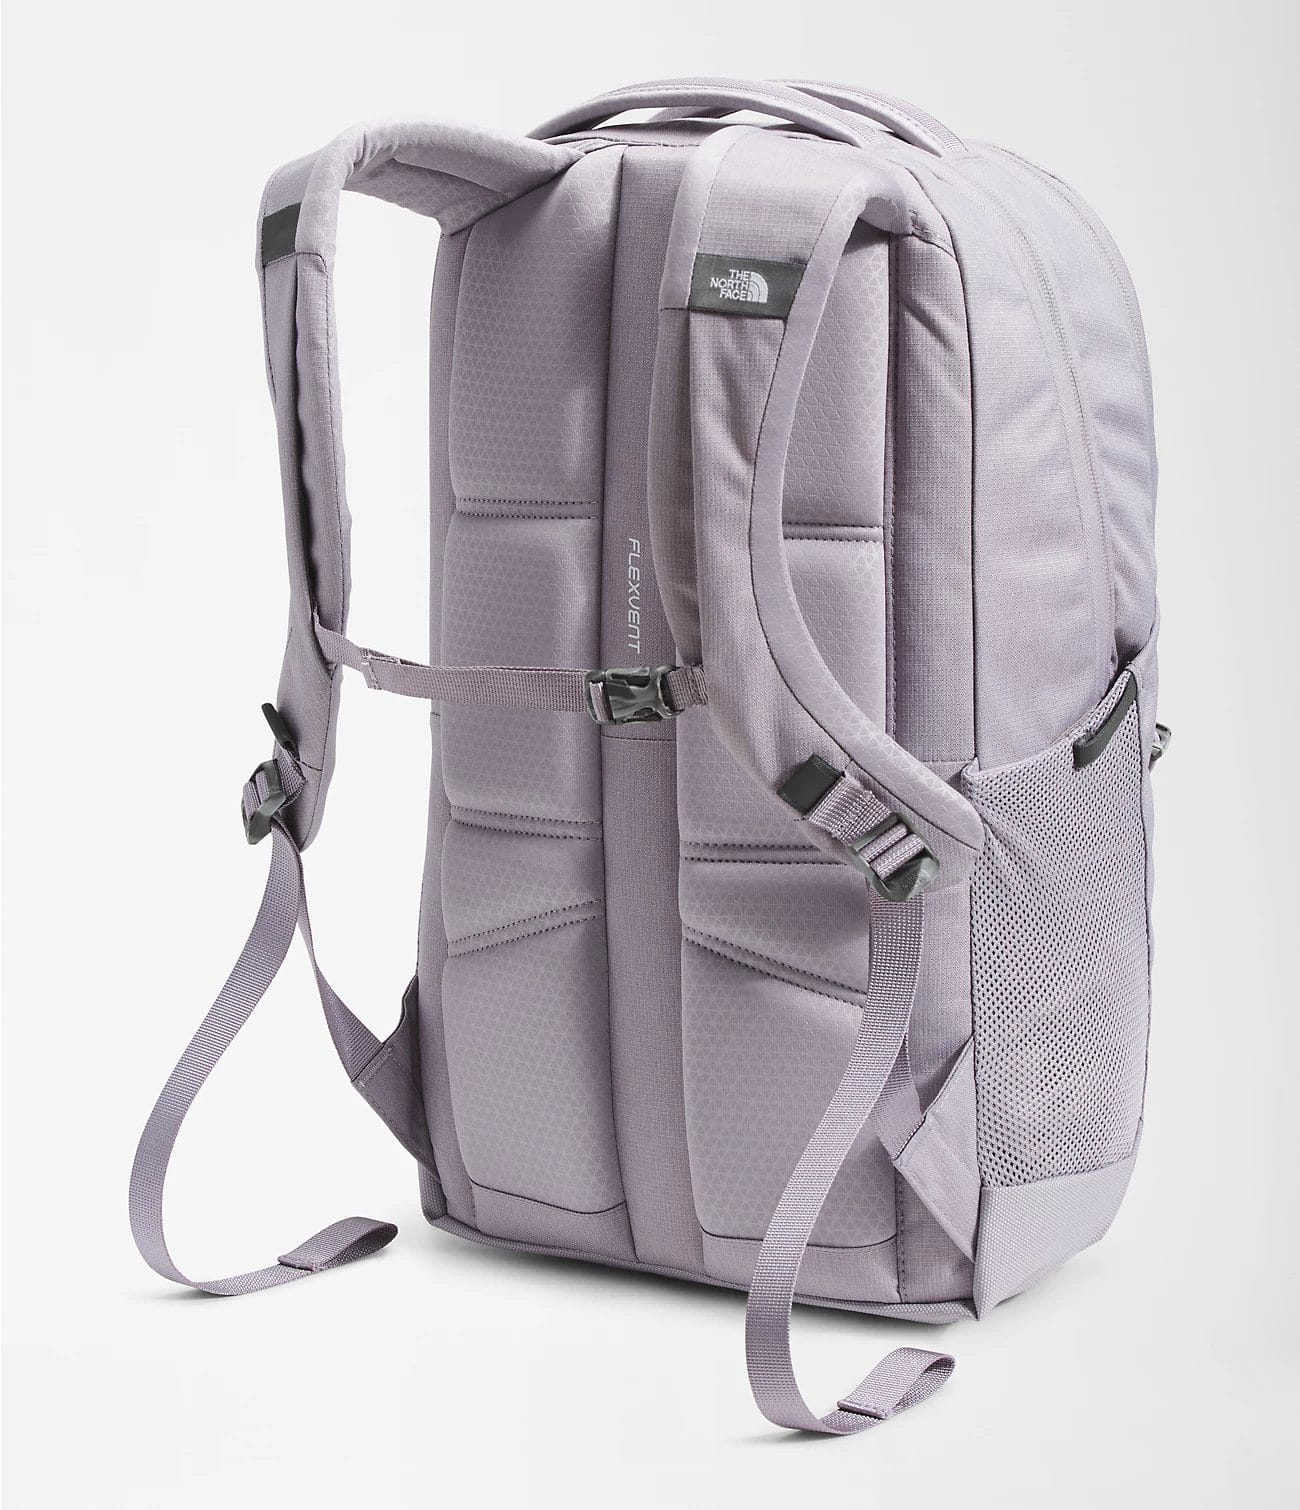  THE NORTH FACE Jester Commuter Laptop Backpack, Mid